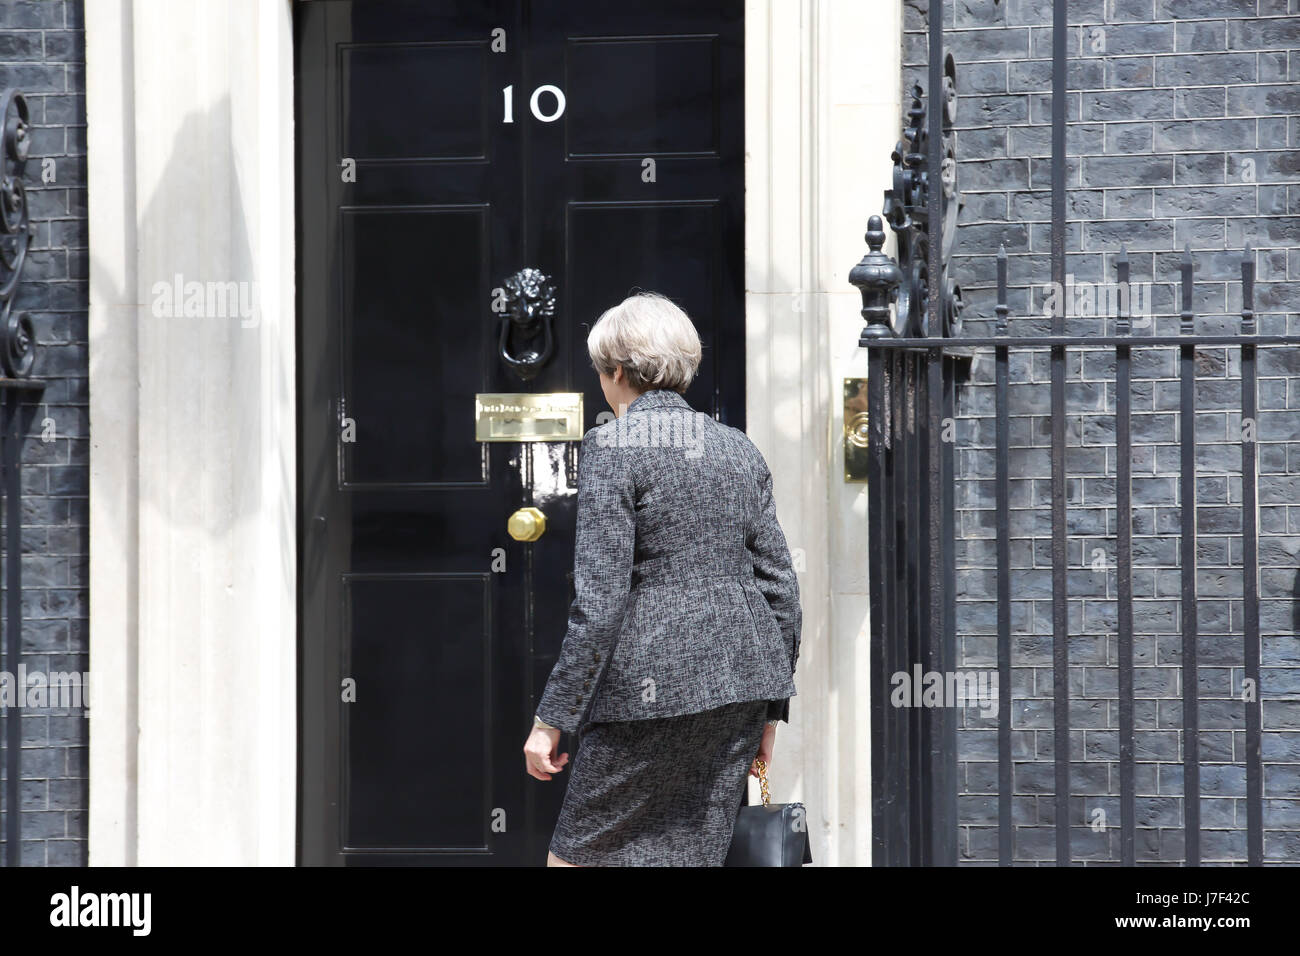 Brussels, Belgium. 25th May, 2017. Prime minister, Theresa May, arrives at Downing St in London before leaving to attend the NATO summit in Brussels.©Keith Larby/Alamy Live News Stock Photo